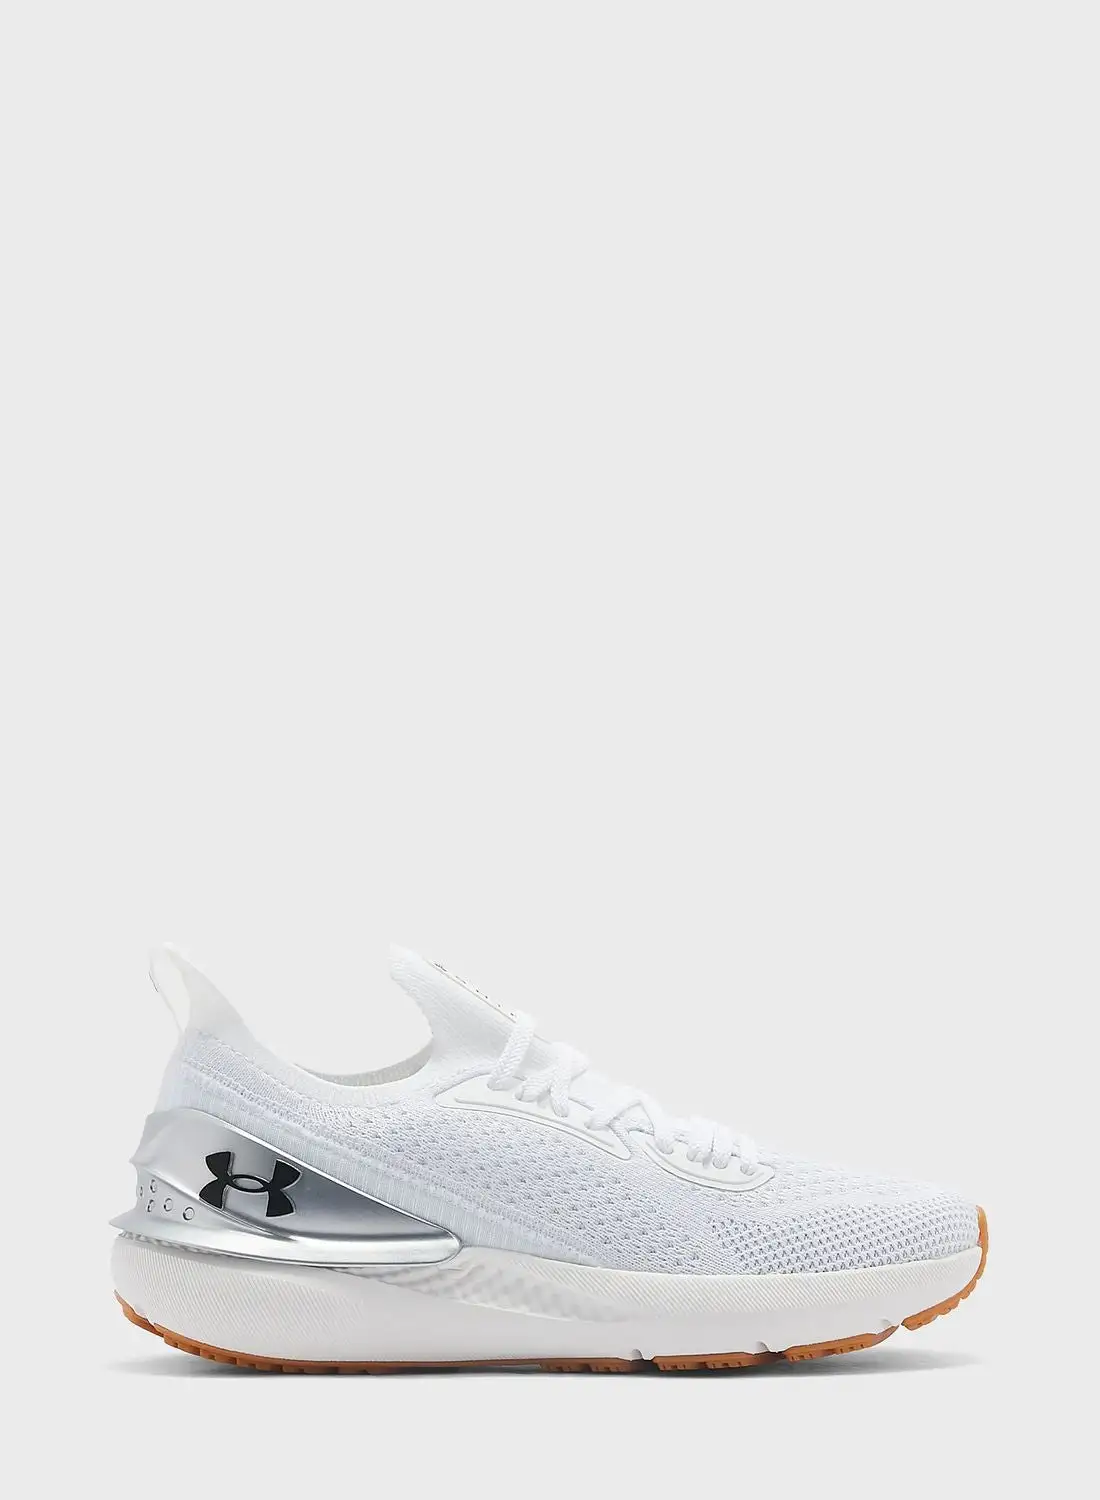 UNDER ARMOUR Shift Sneakers